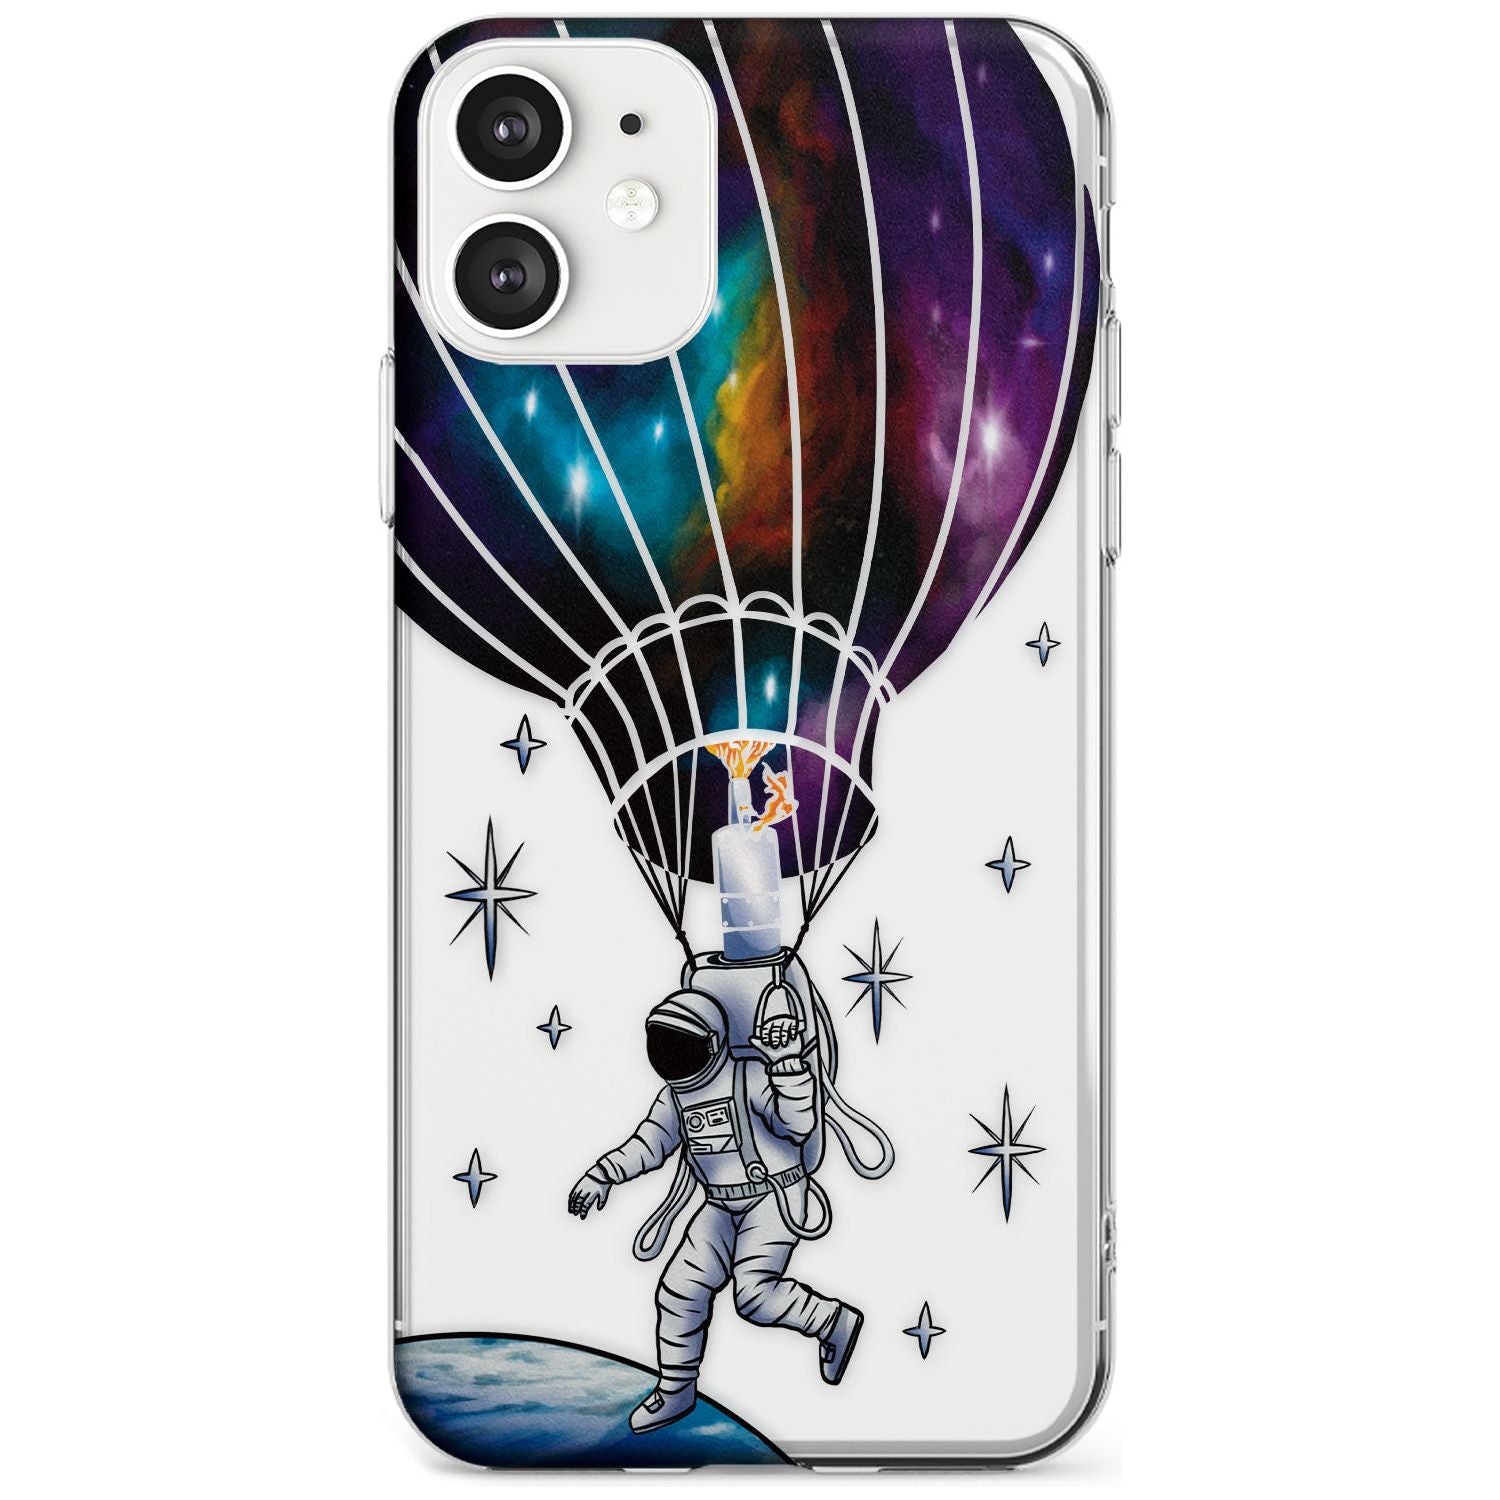 SOLO ODYSSEY Black Impact Phone Case for iPhone 11